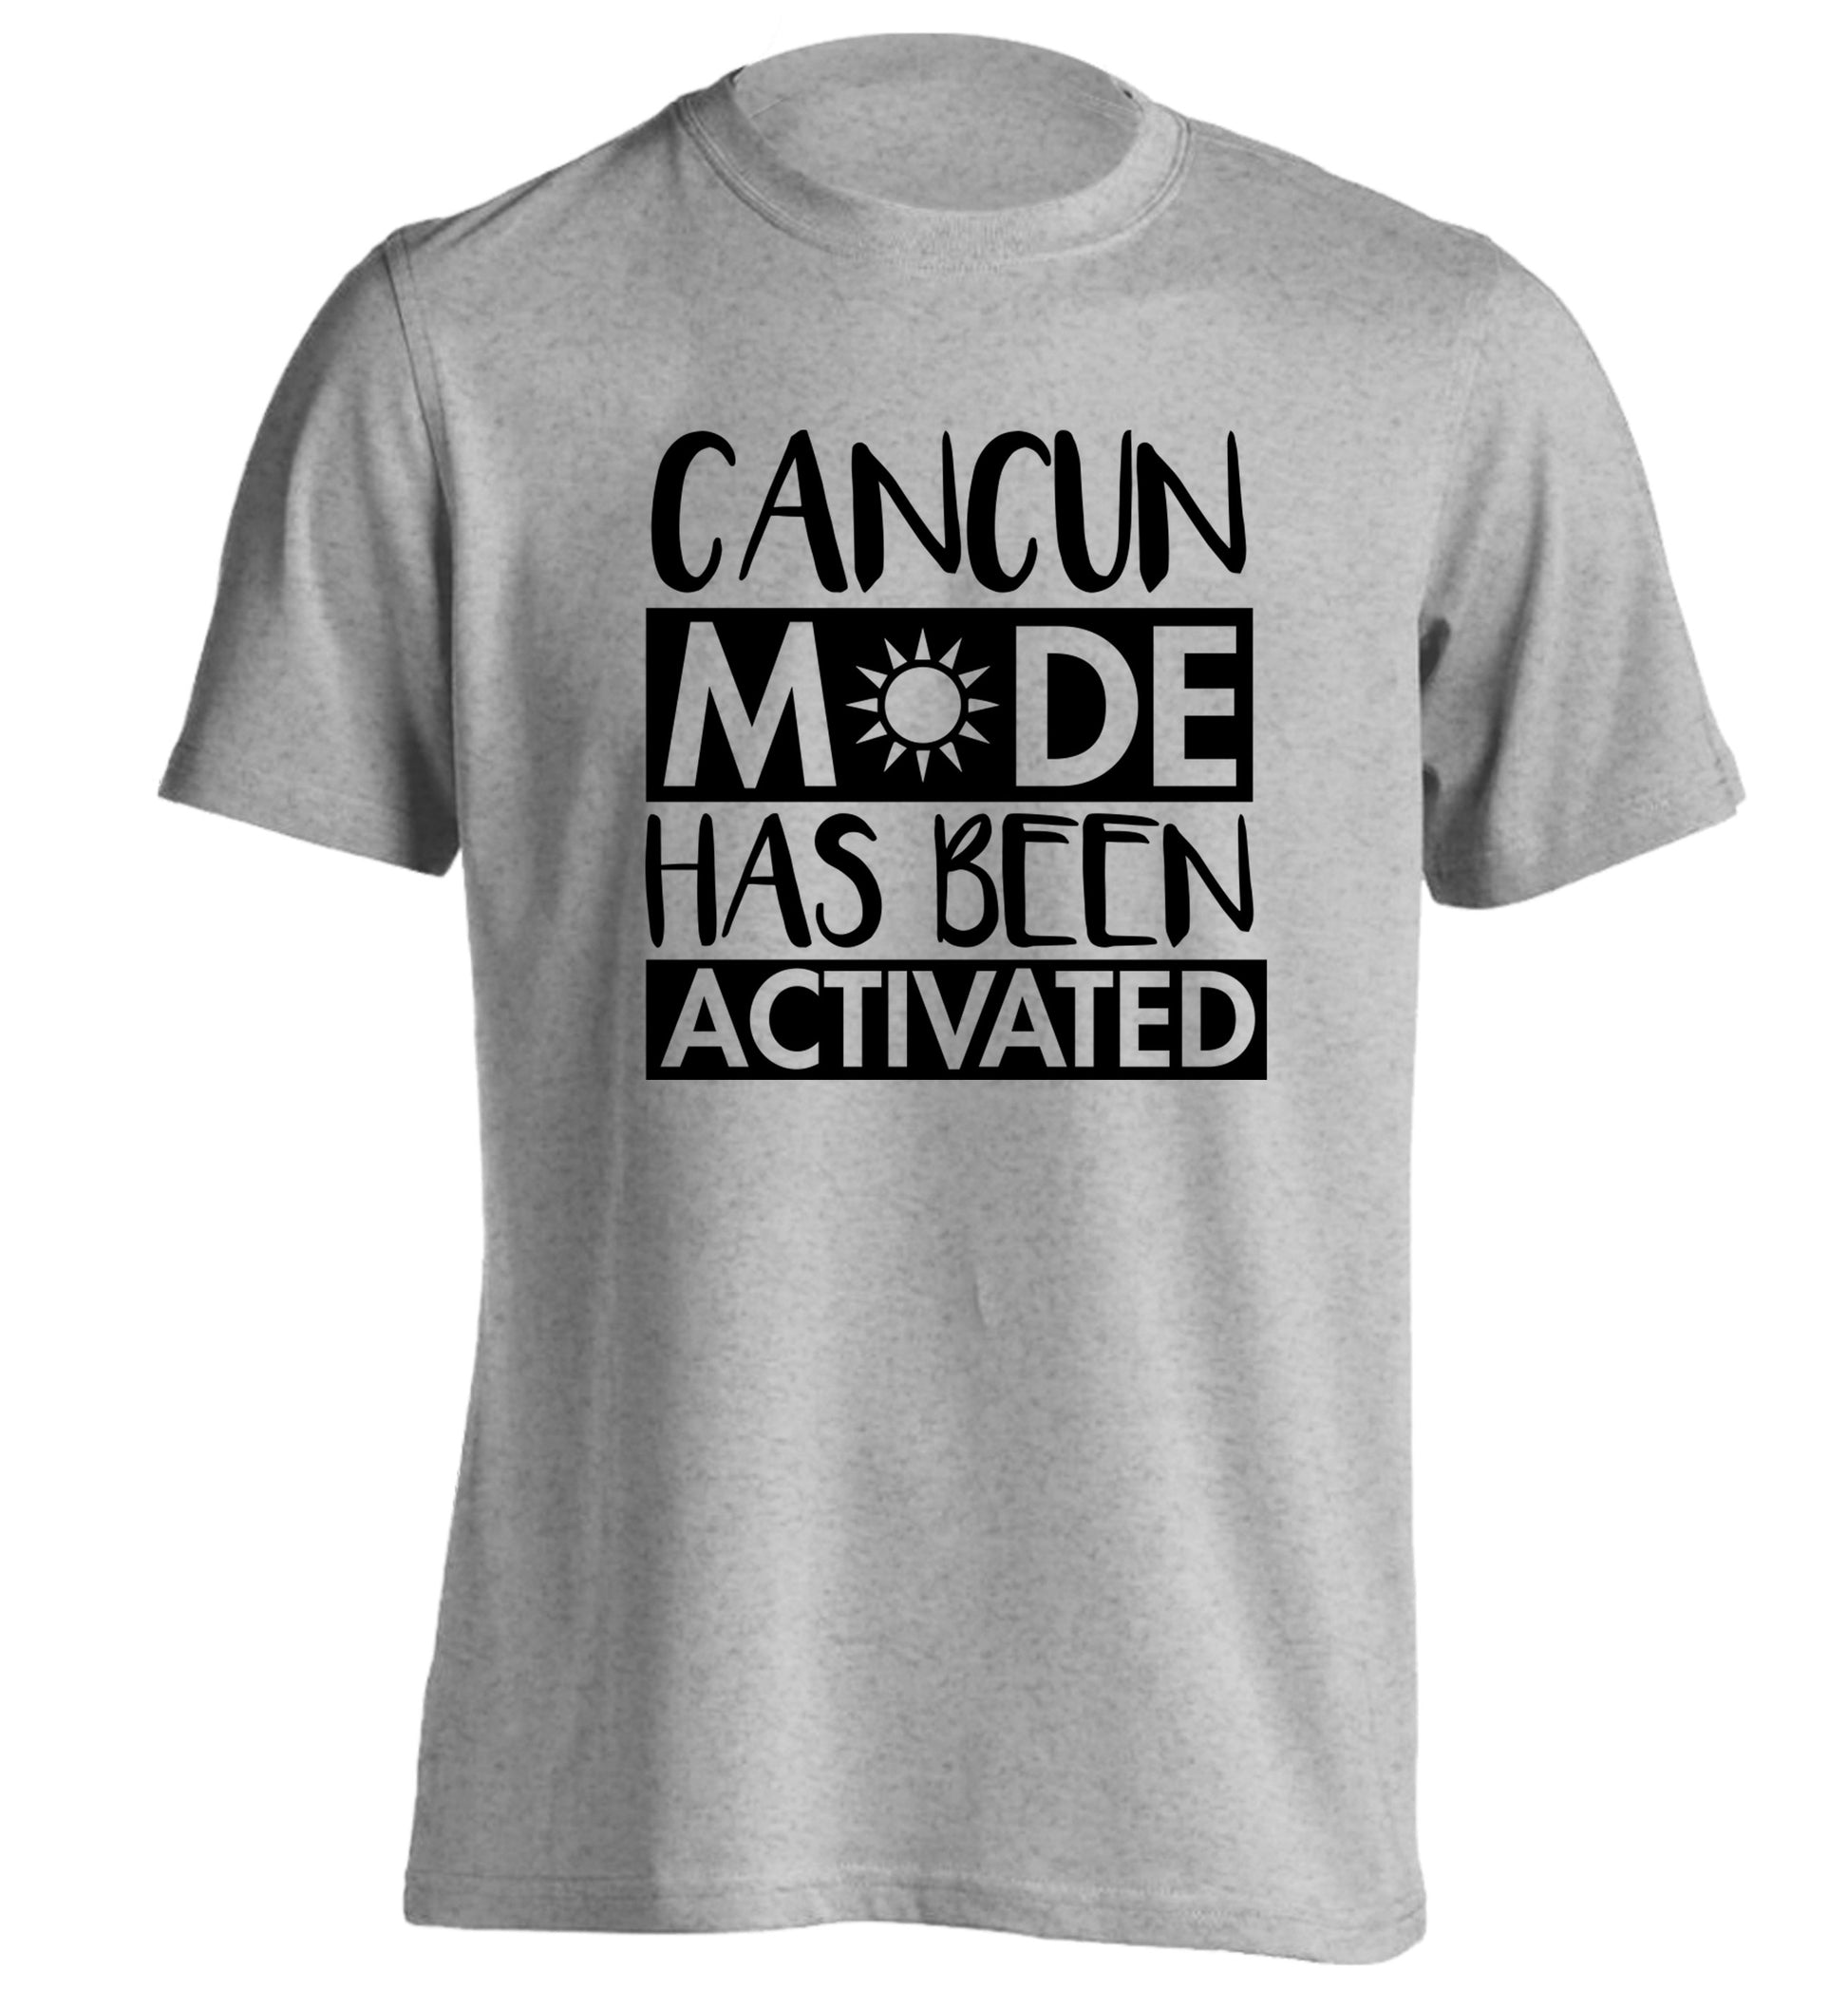 Cancun mode has been activated adults unisex grey Tshirt 2XL